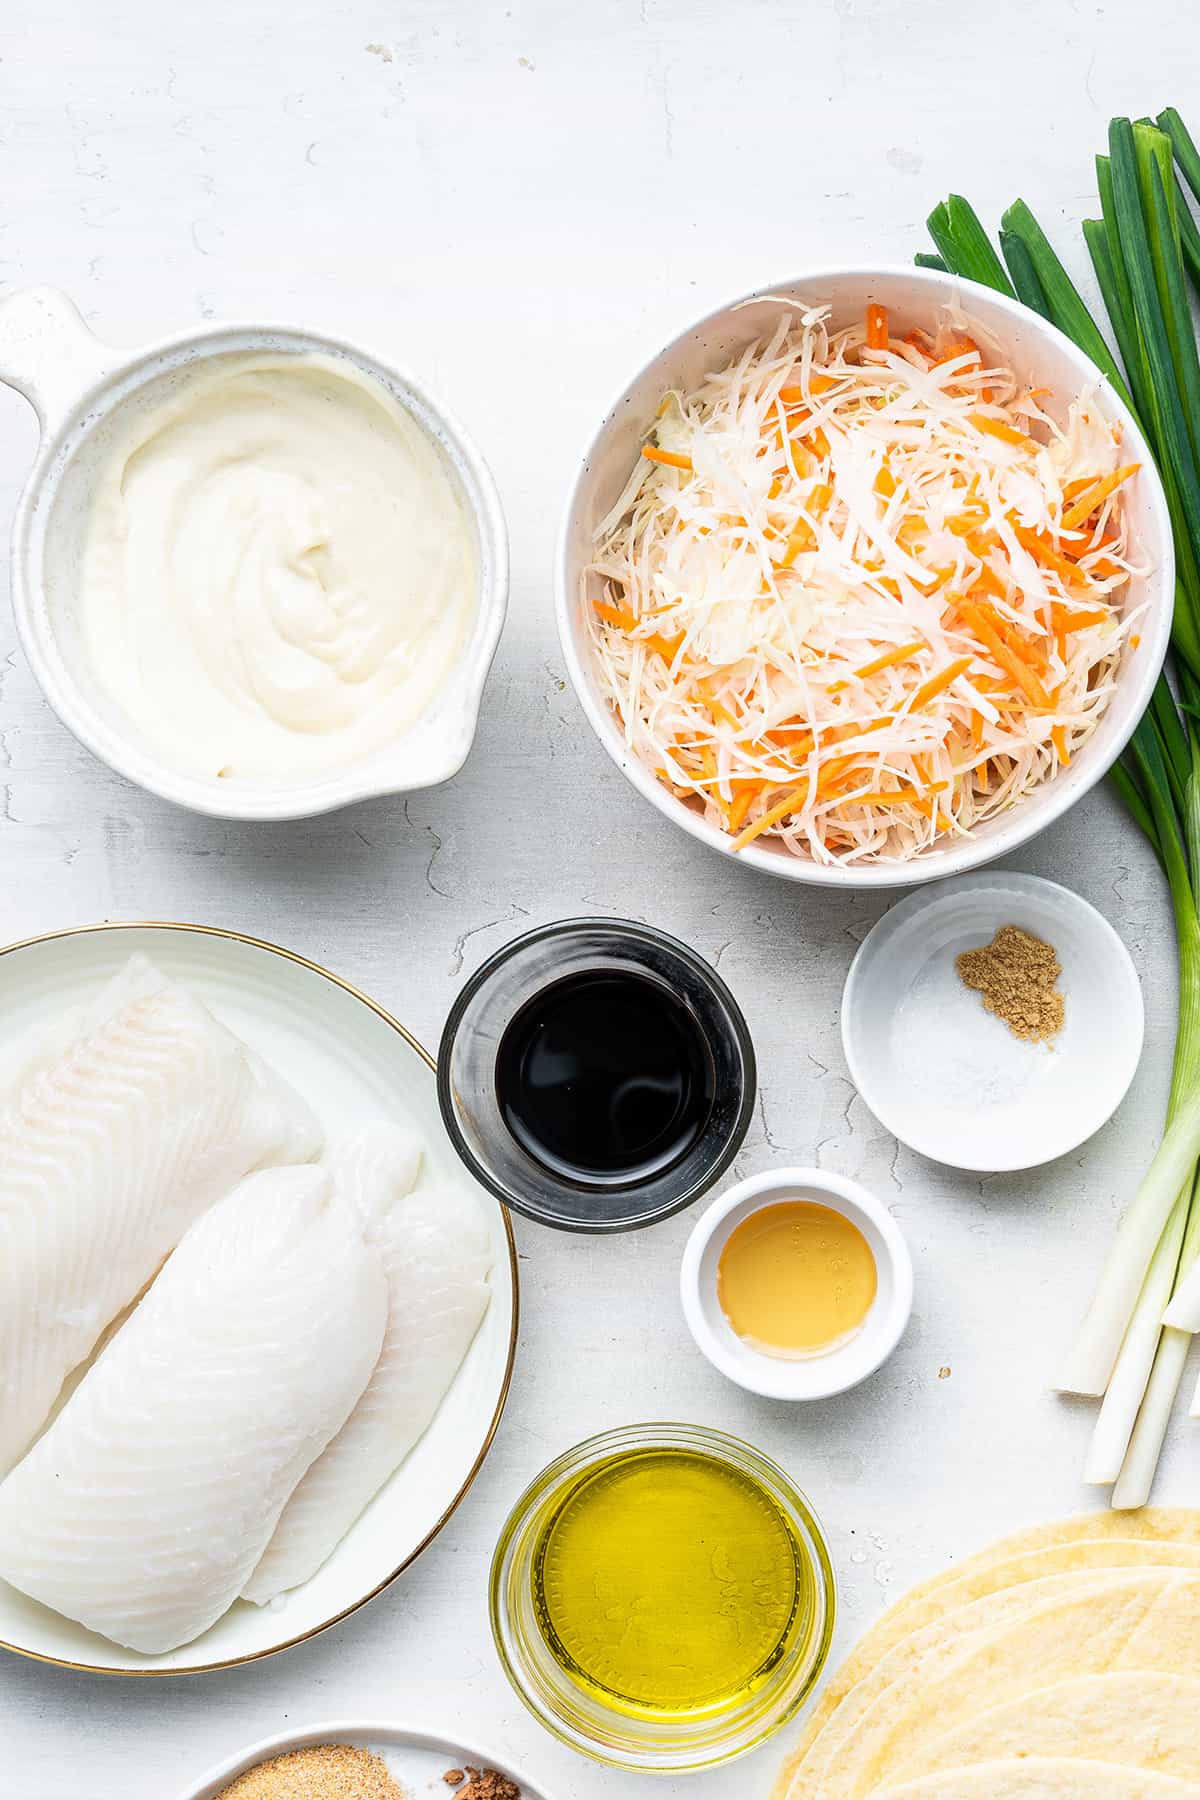 Overhead view of a bowl of carrots and cabbage, a bowl of mayonnaise, a bowl of soy sauce, a bowl of honey, a bowl of salt and ground ginger, a bowl of oil, a plate of raw fish, and some scallions